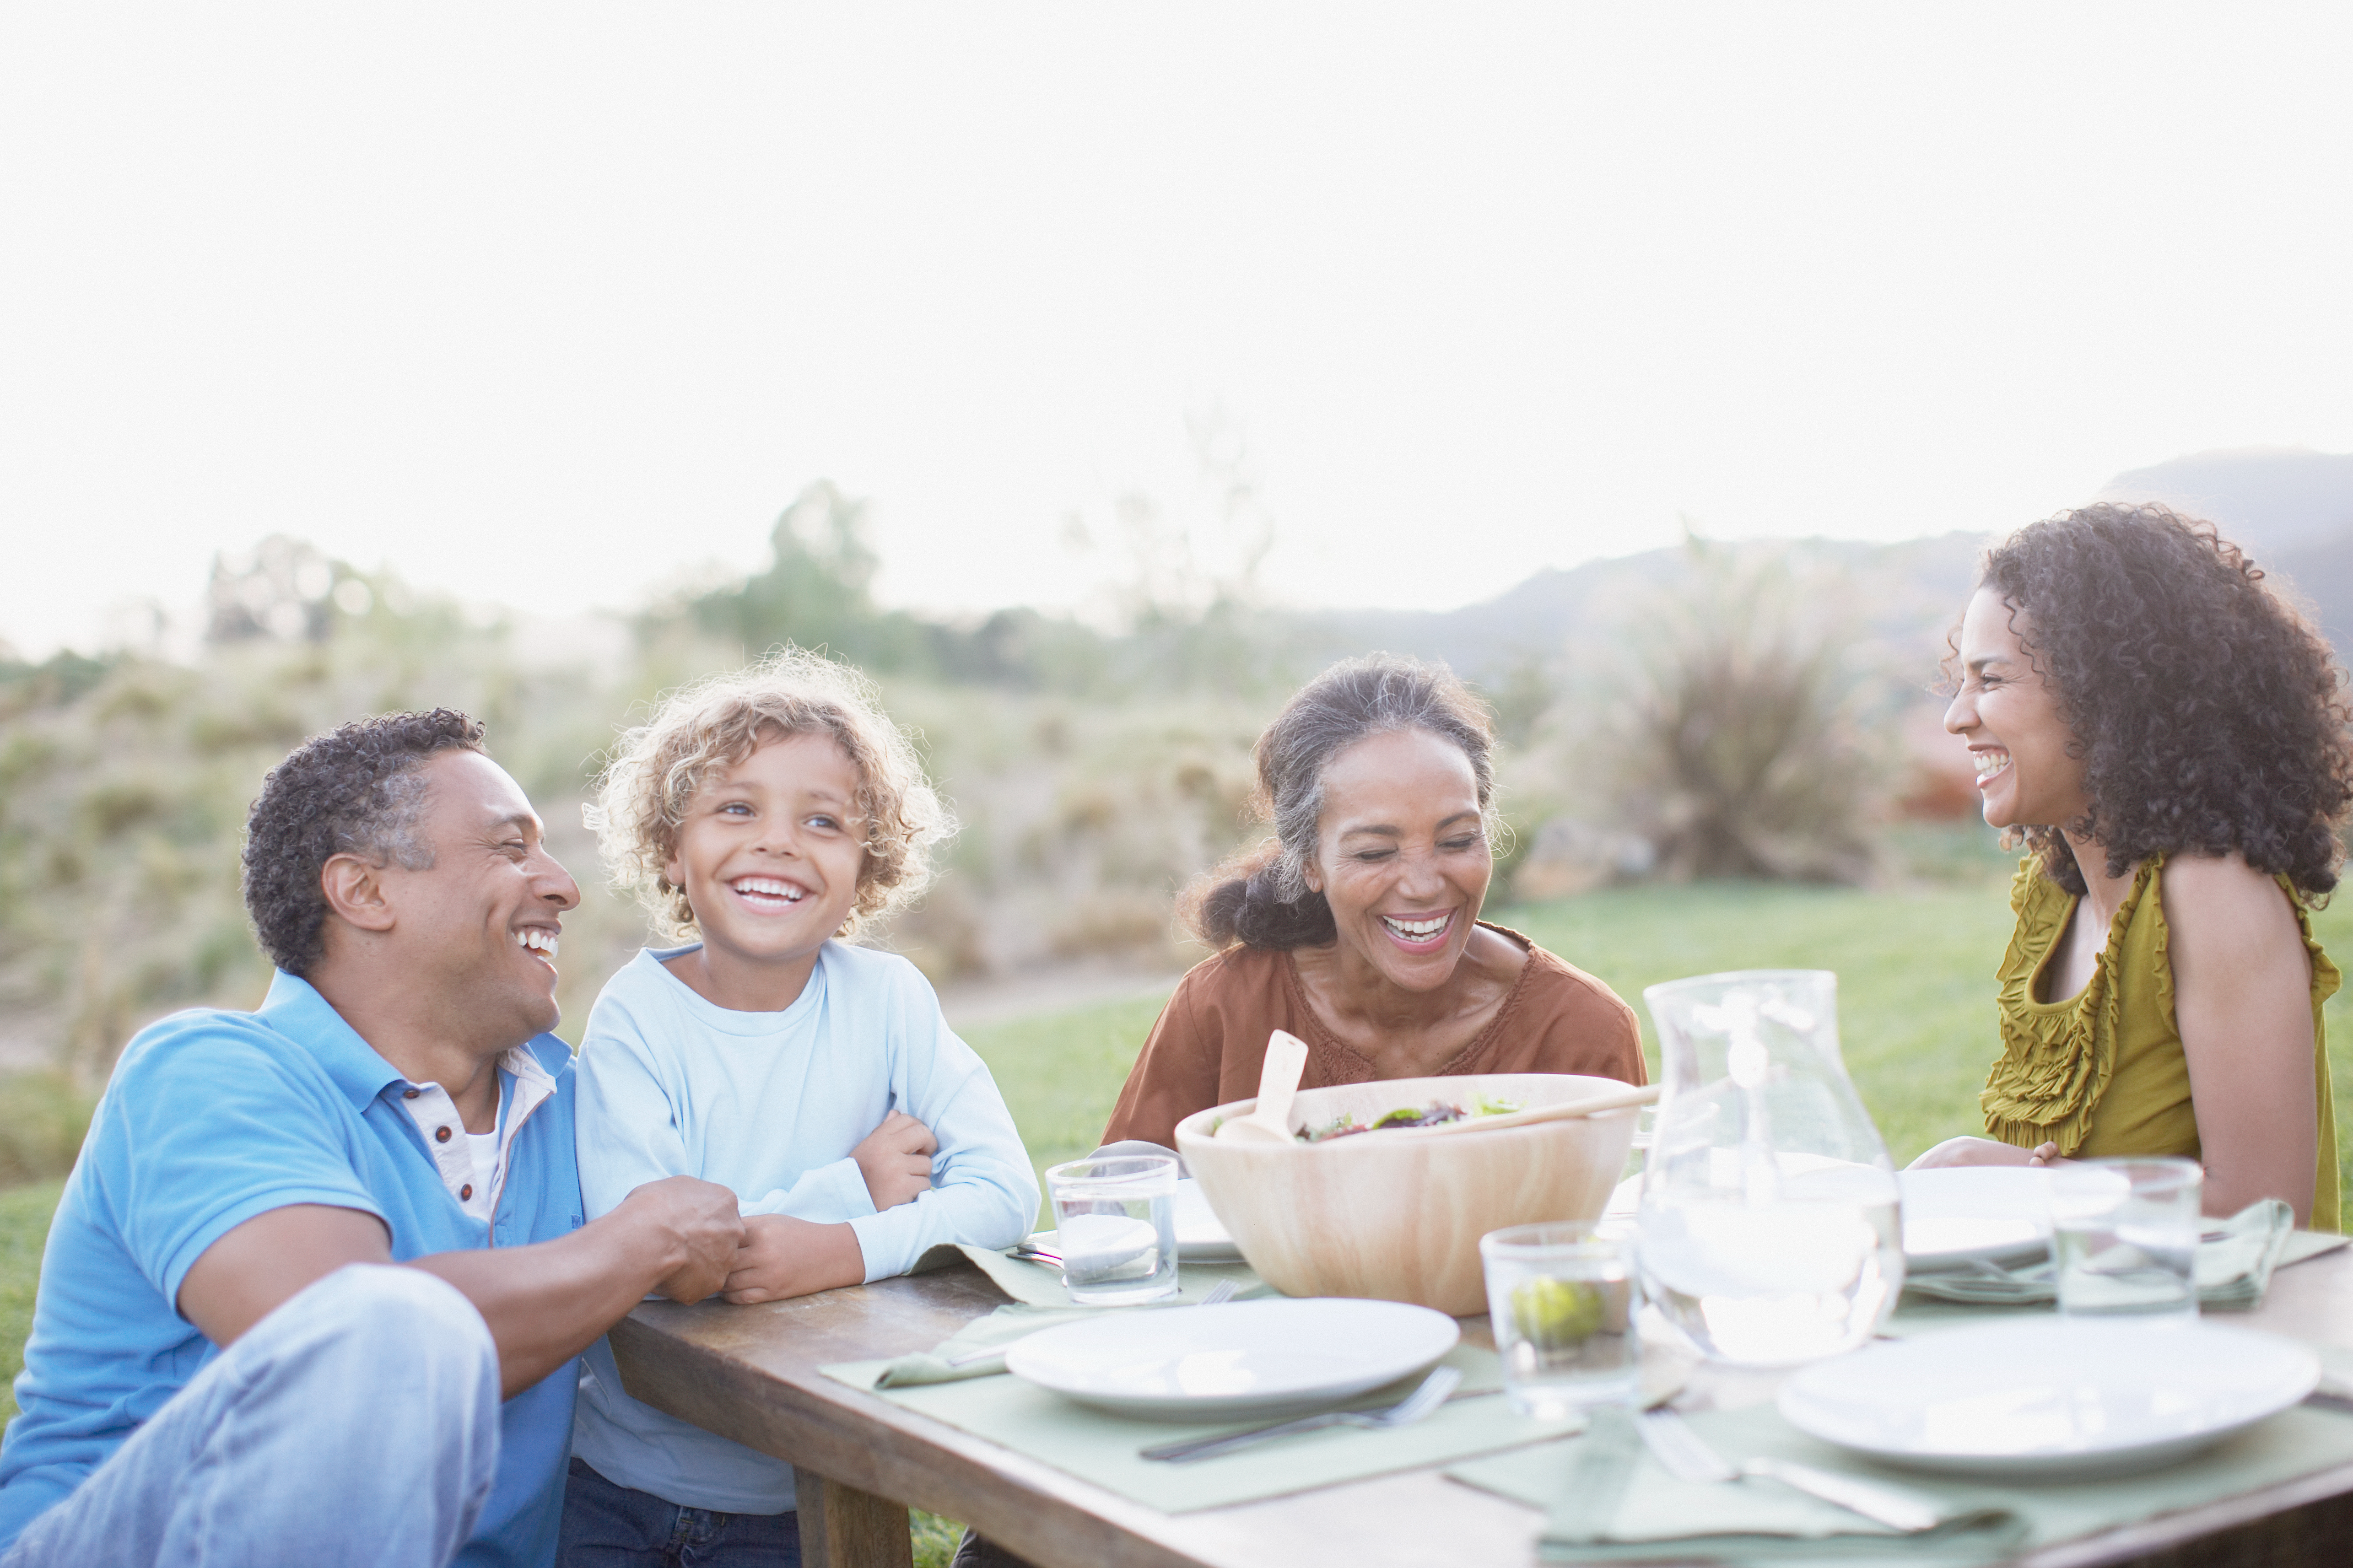 A family of four seated at a table, smiling and enjoying a meal outdoors